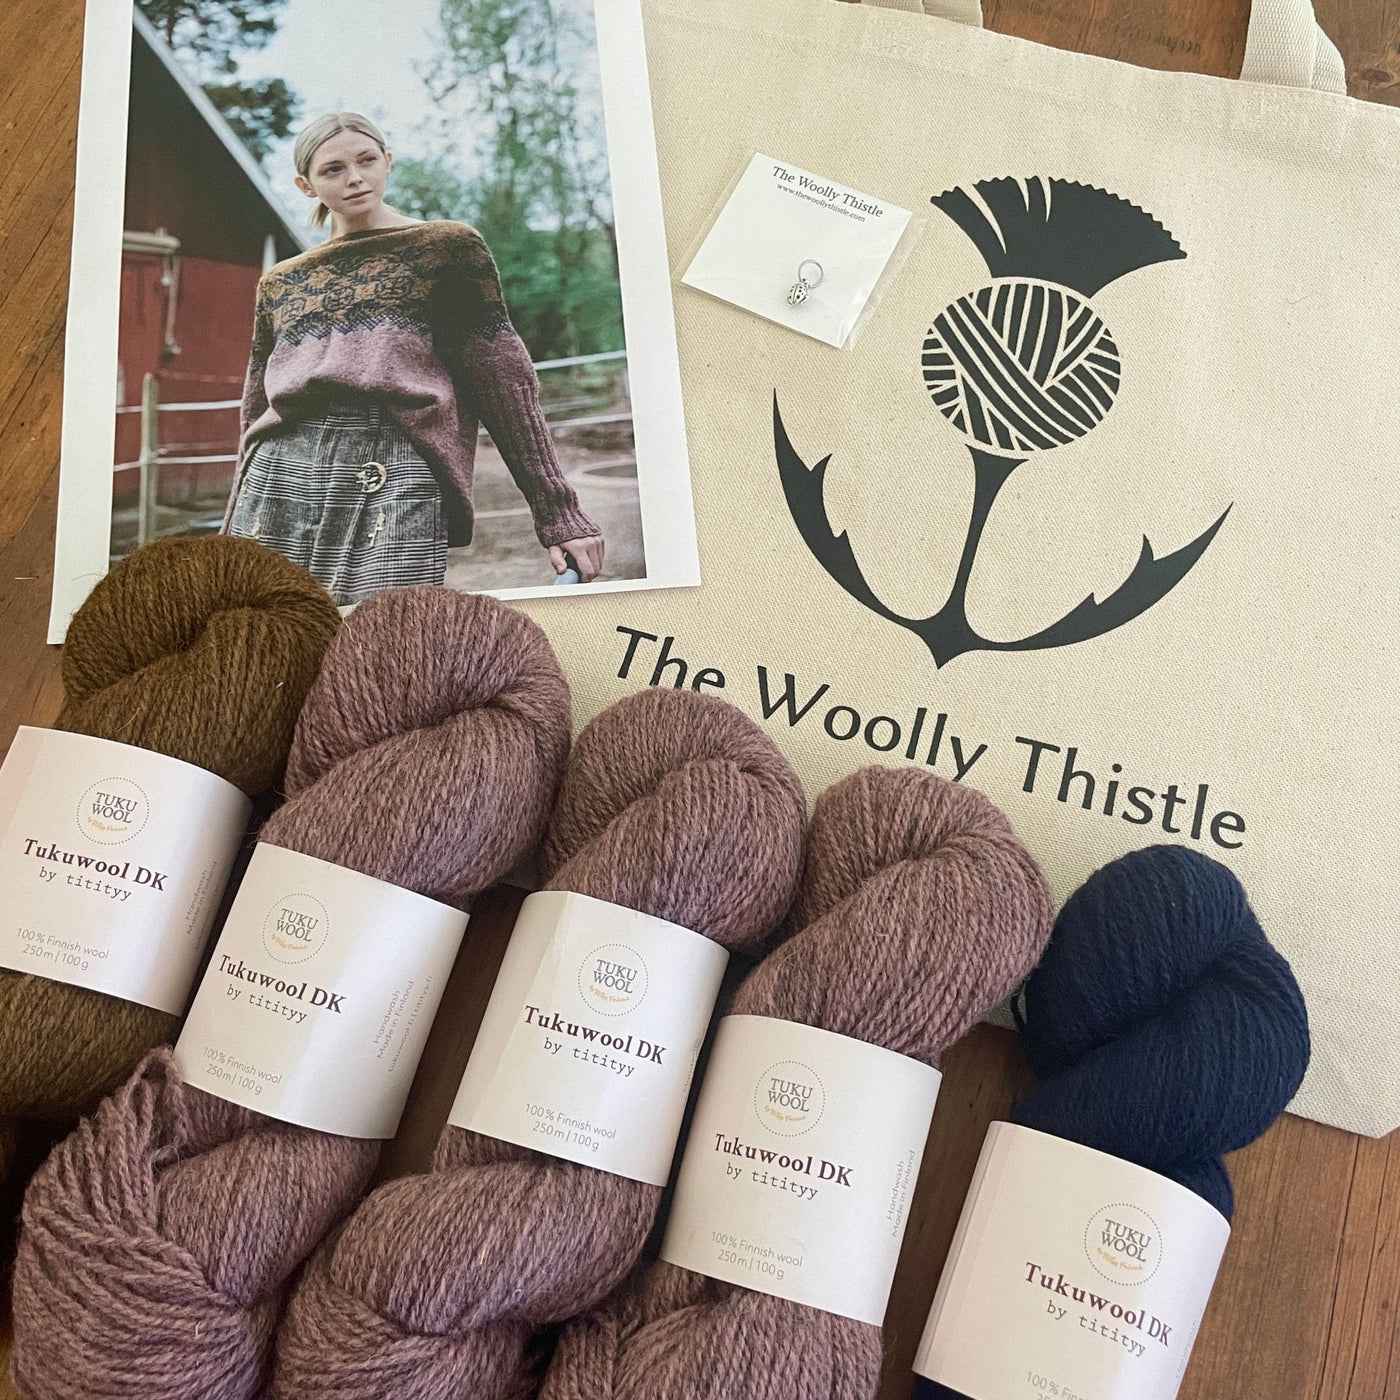 Components of the Pohjolan Neito Sweater yarn set: 5 skeins of Tukuwool DK in colors Ujo, Nila, and Tynni shown with photo of sweater and The Woolly Thistle tote bag and stitch marker. 